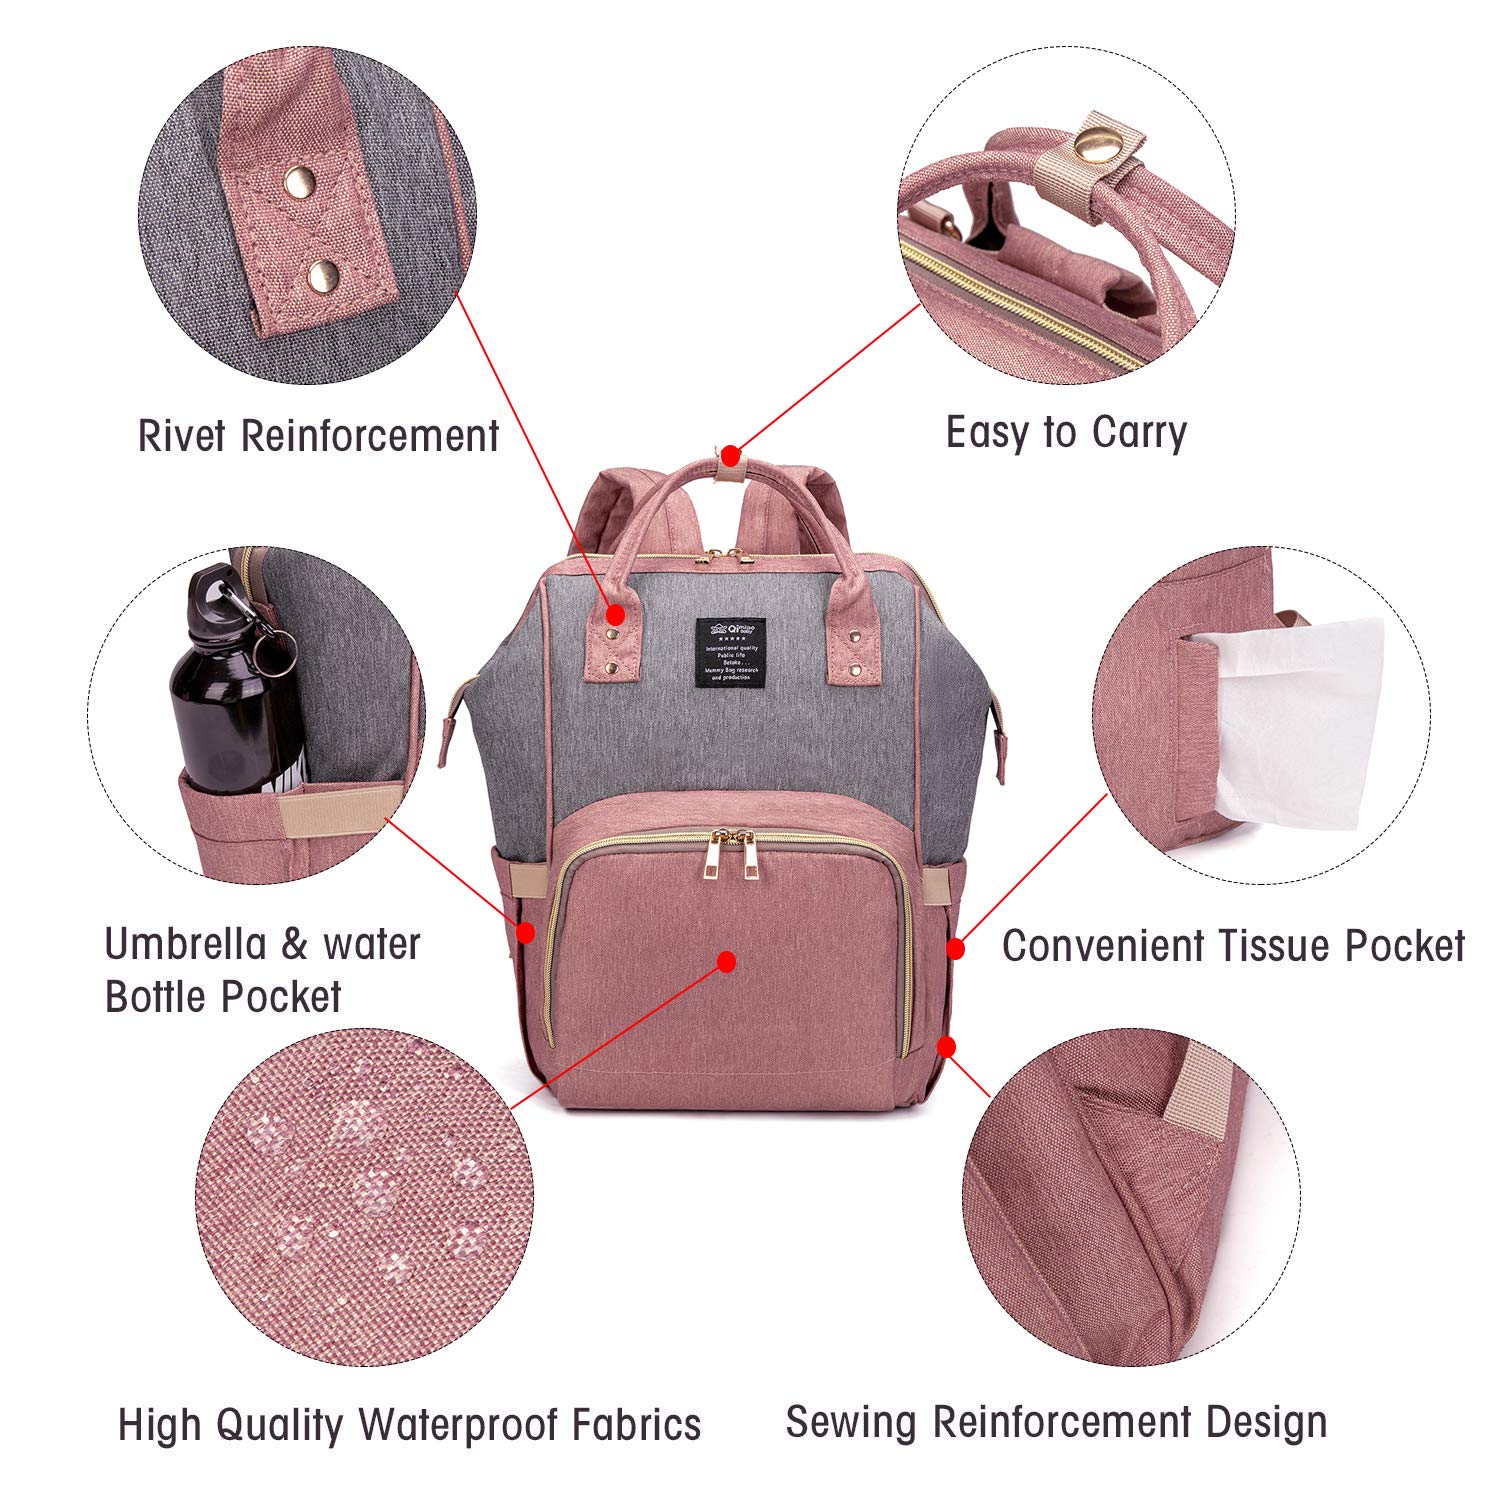 QIMIAOBABY Diaper Bag Backpack,Waterproof Multifunctional Large Travel Nappy Changing Bags… (Pink with gray)